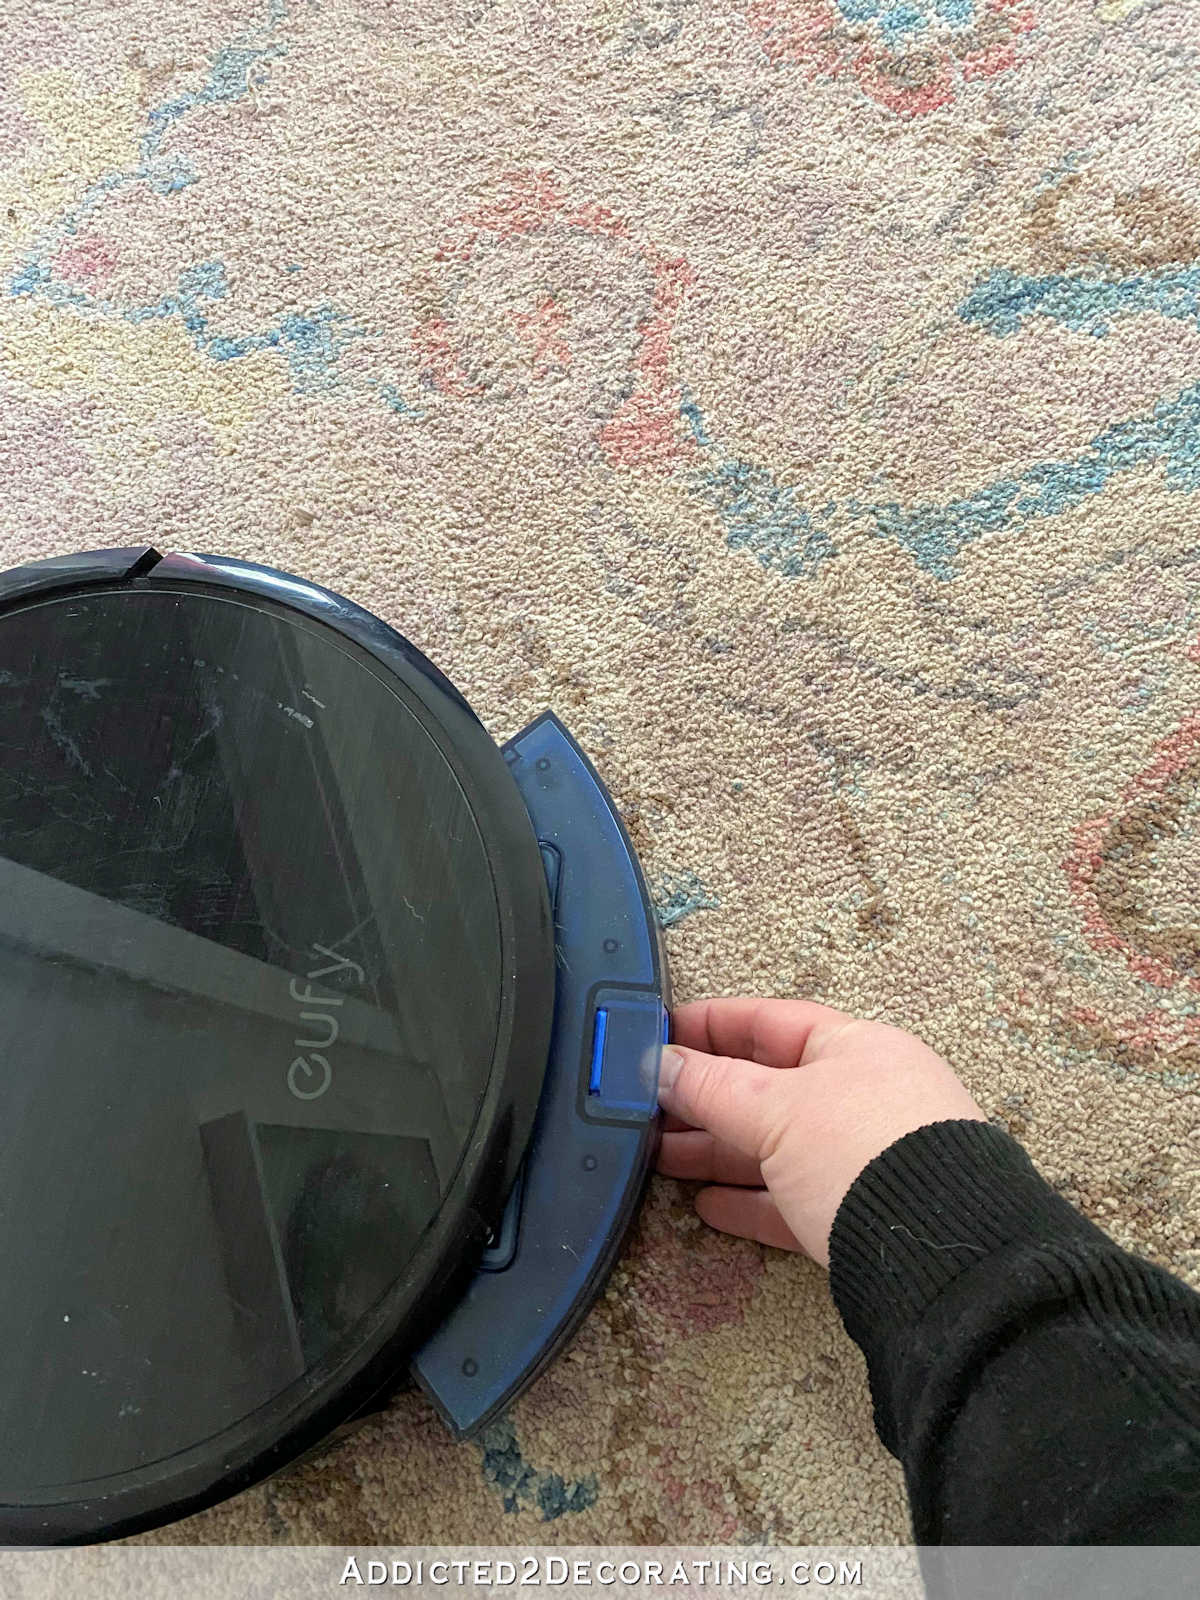 I Finally Bought A Robot Vacuum…But Here’s The Problem (Plus, Please Help An Insomniac Sleep!!)